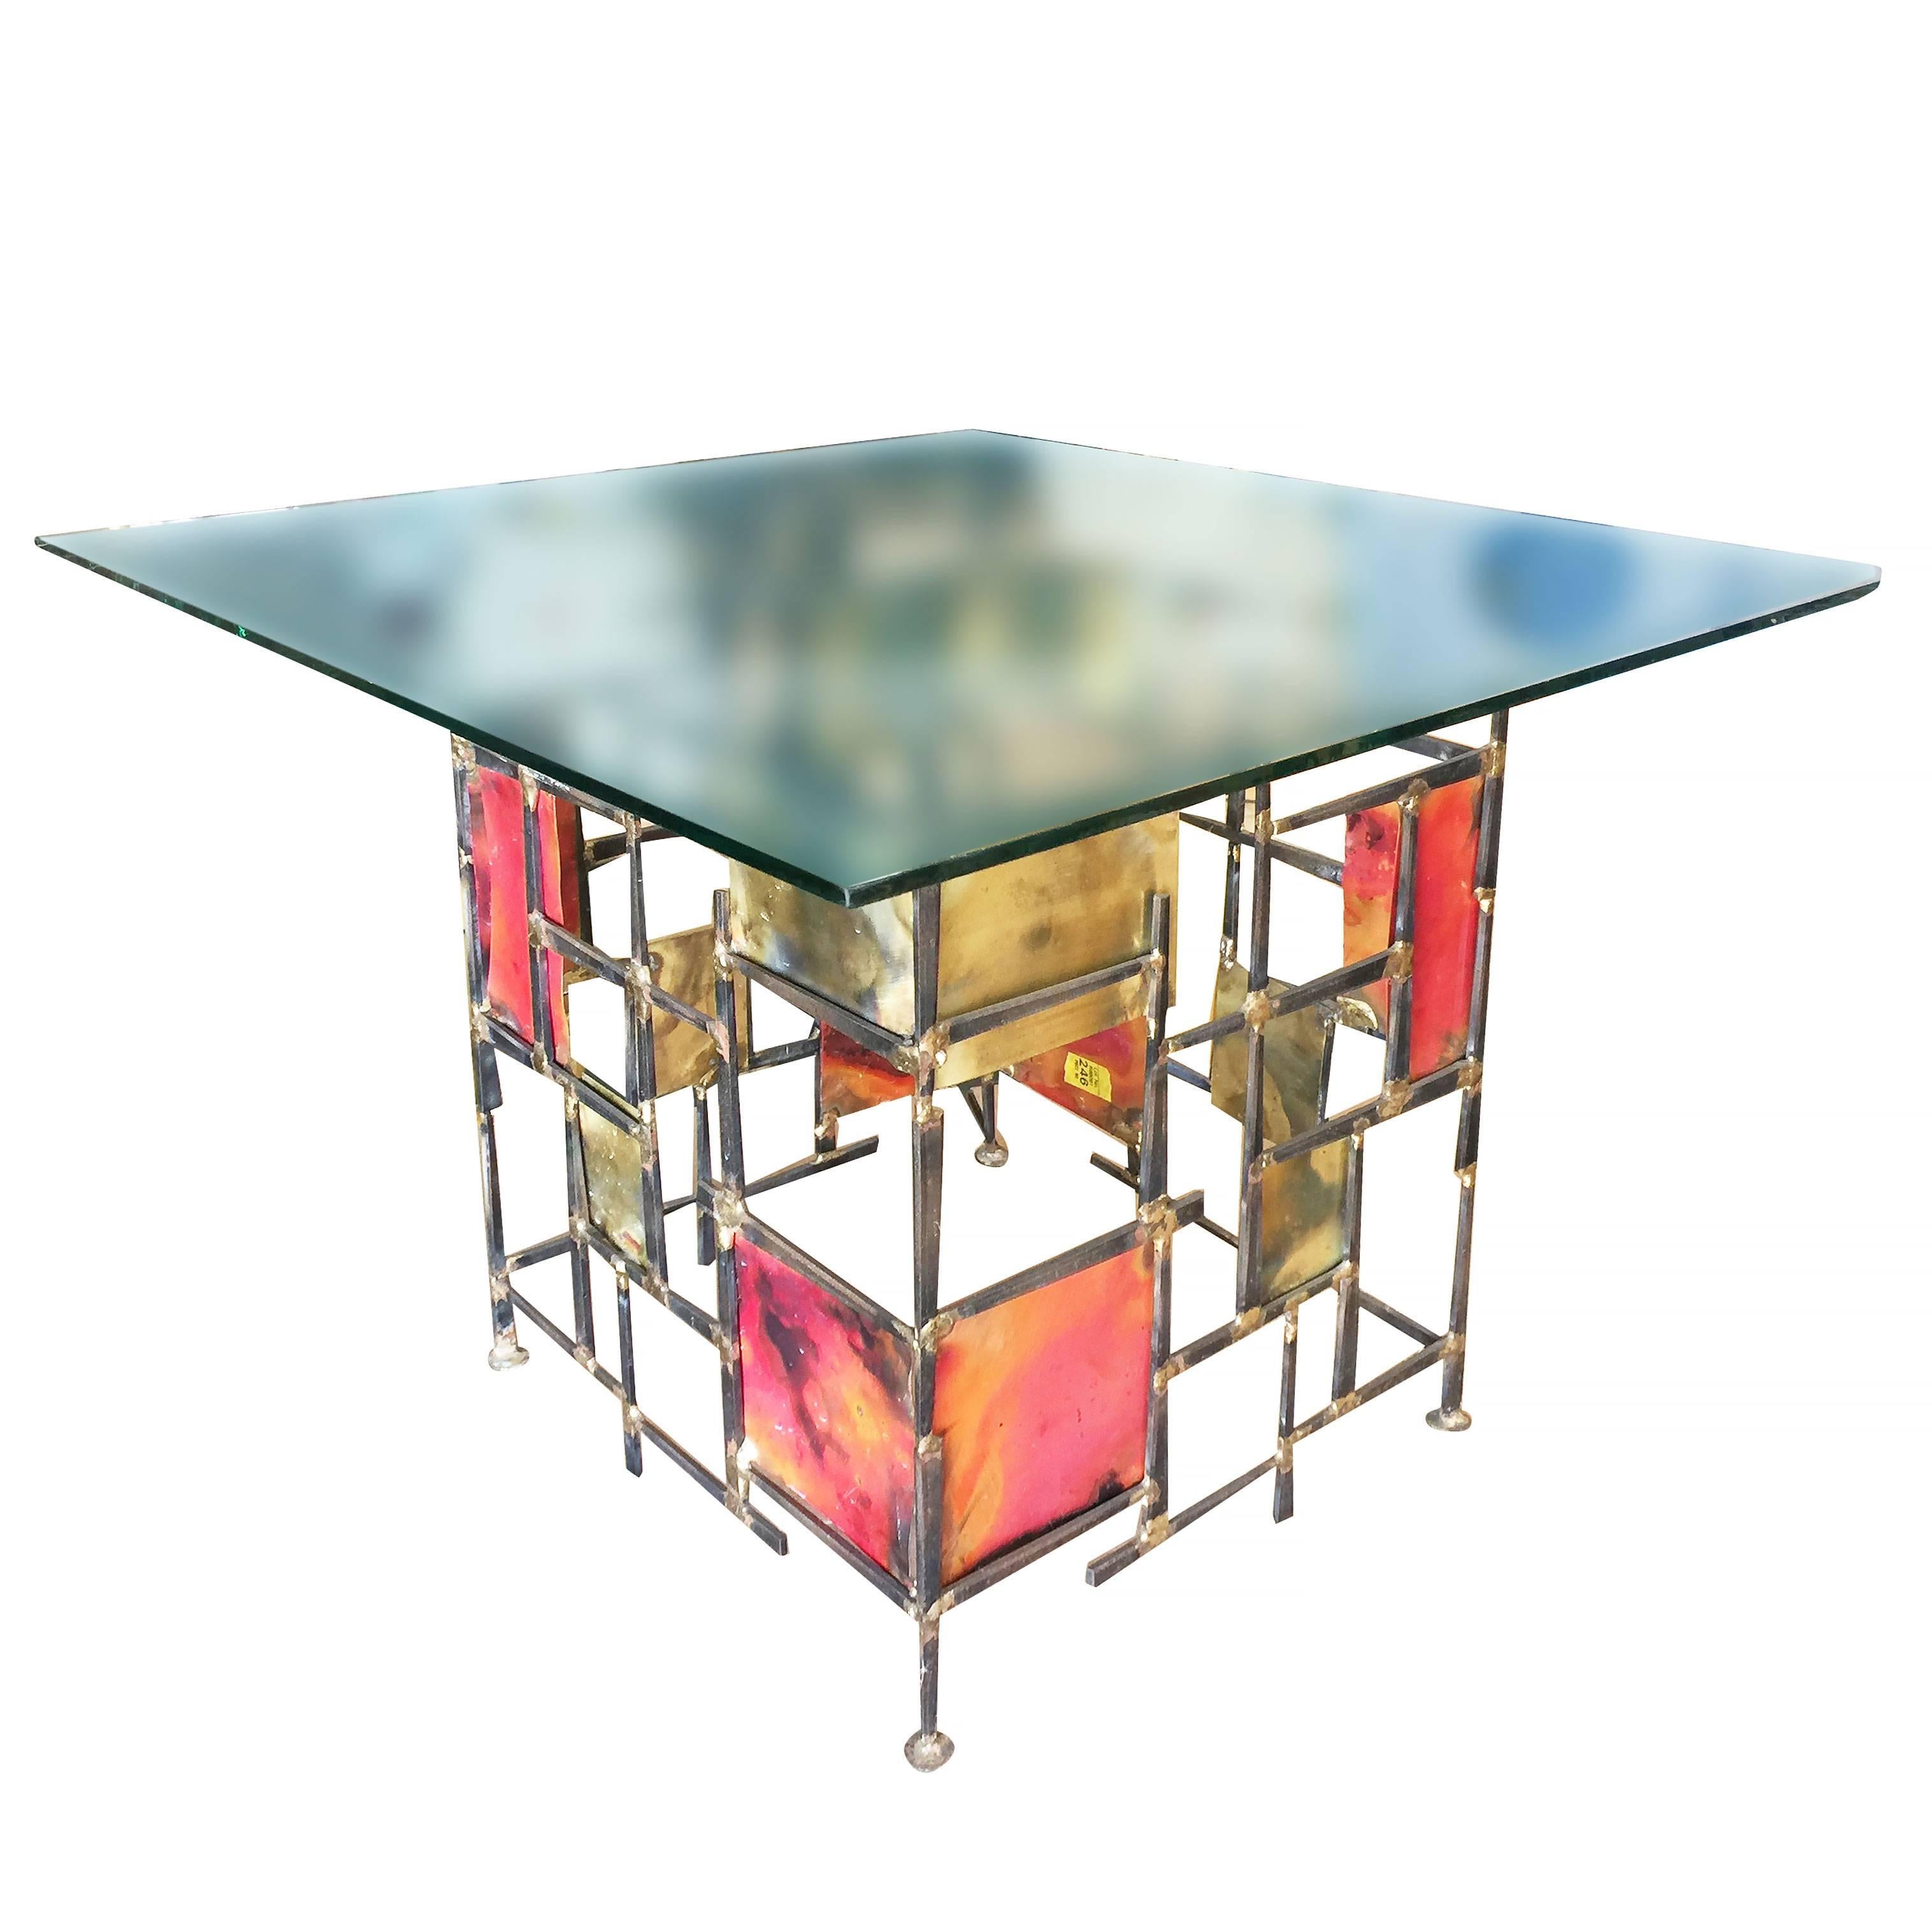 Silas Seandel style Brutalist mixed metal nail side table with glass top. 

The table features a sculptural base made with welded nails and enameled flame cut steel piece complete with glass top.